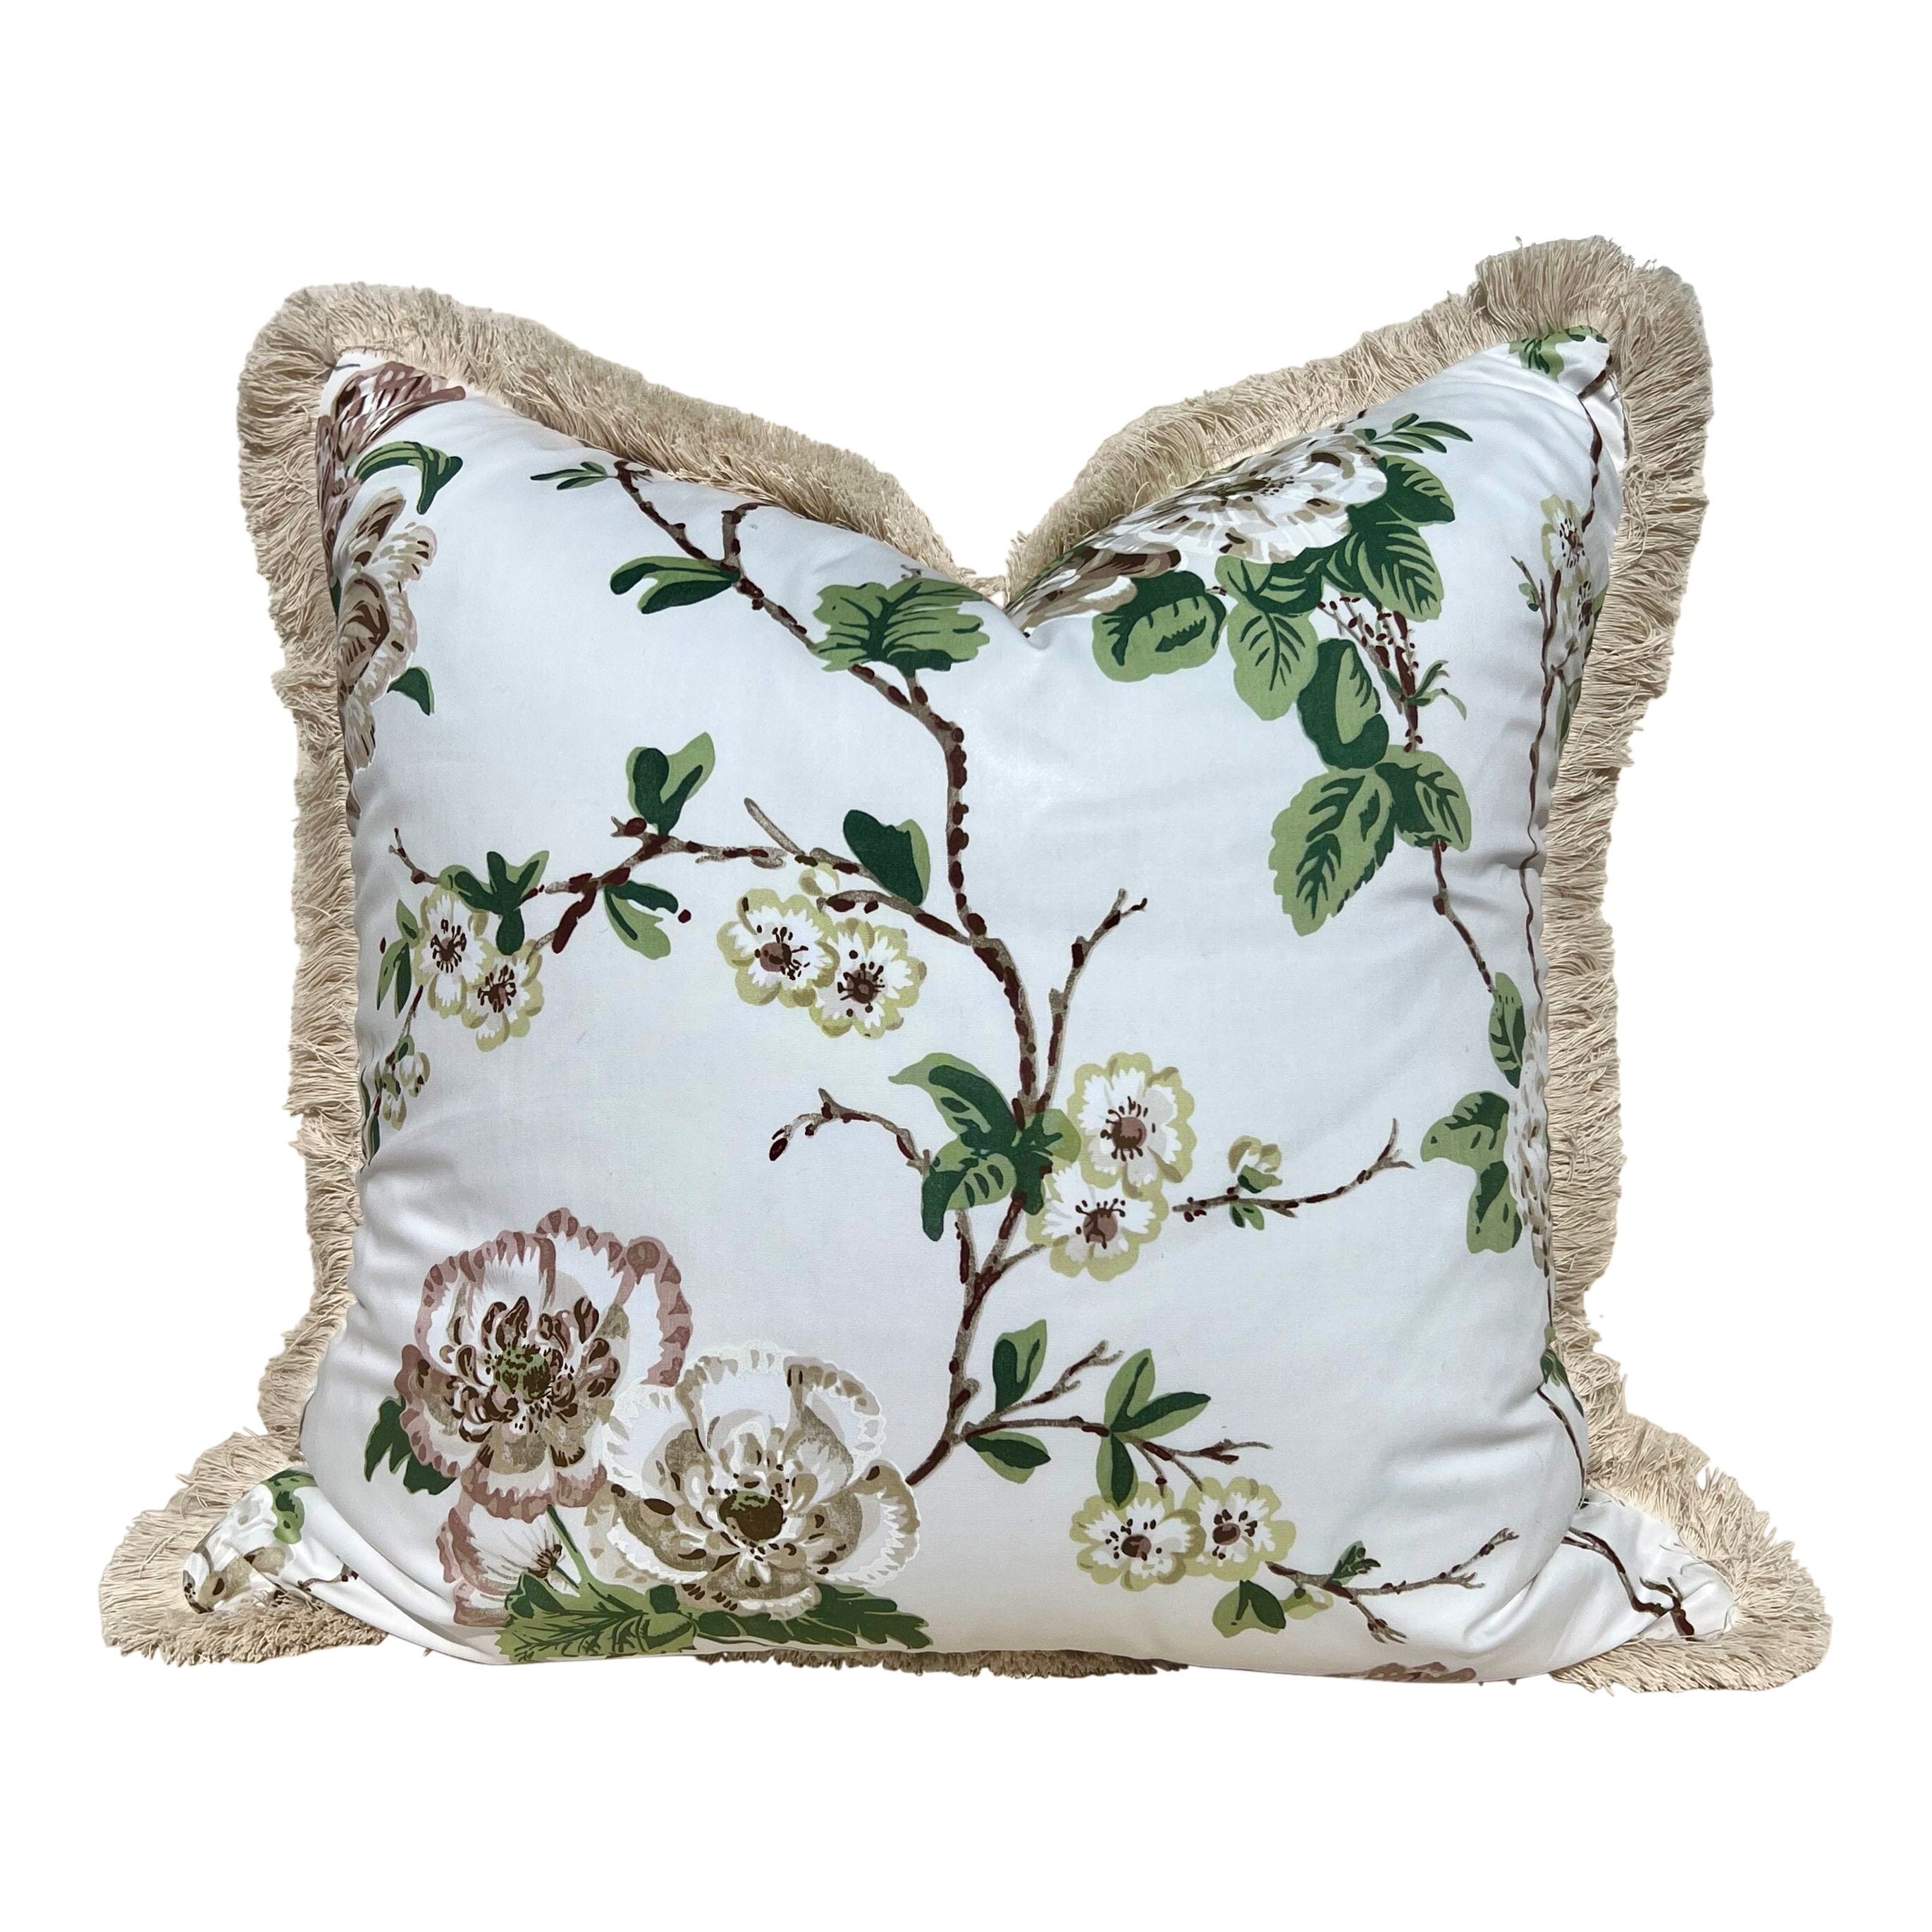 Schumacher Betty Chintz Pillow in Quiet Pink Embellished with Beige Brush Trim. Decorative High End Pillows, Designer Pillow Covers